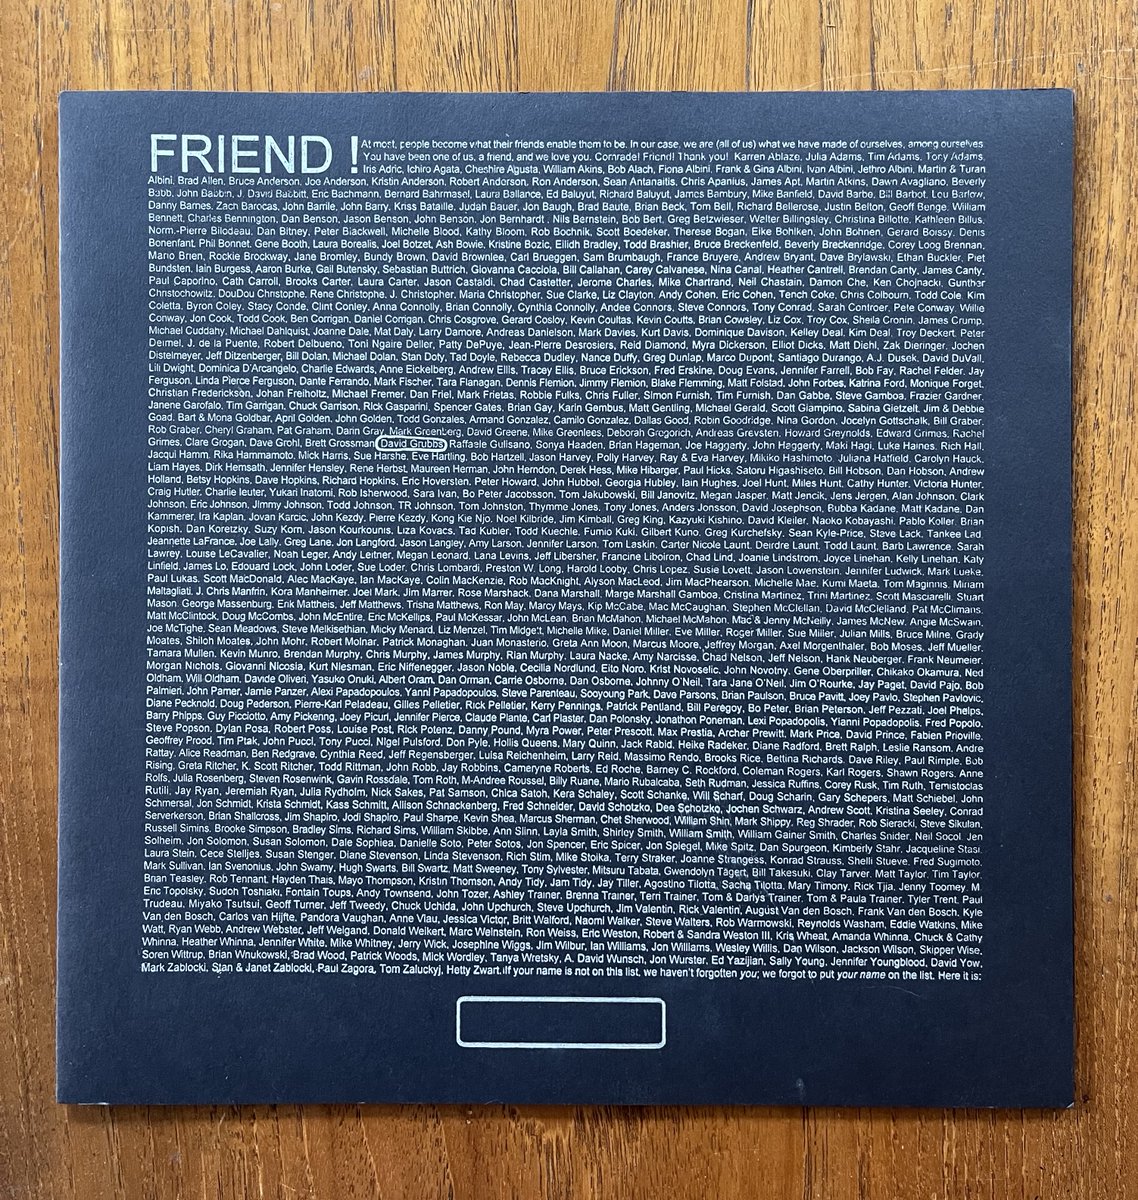 Shellac's 'Futurist,' a self-released album to be given to friends, 800 of whose names are printed alphabetically on the sleeve. ('Rachel Grimes, Clare Grogan, Dave Grohl...') No one made them do this! It was their own lovely, insane idea. RIP.